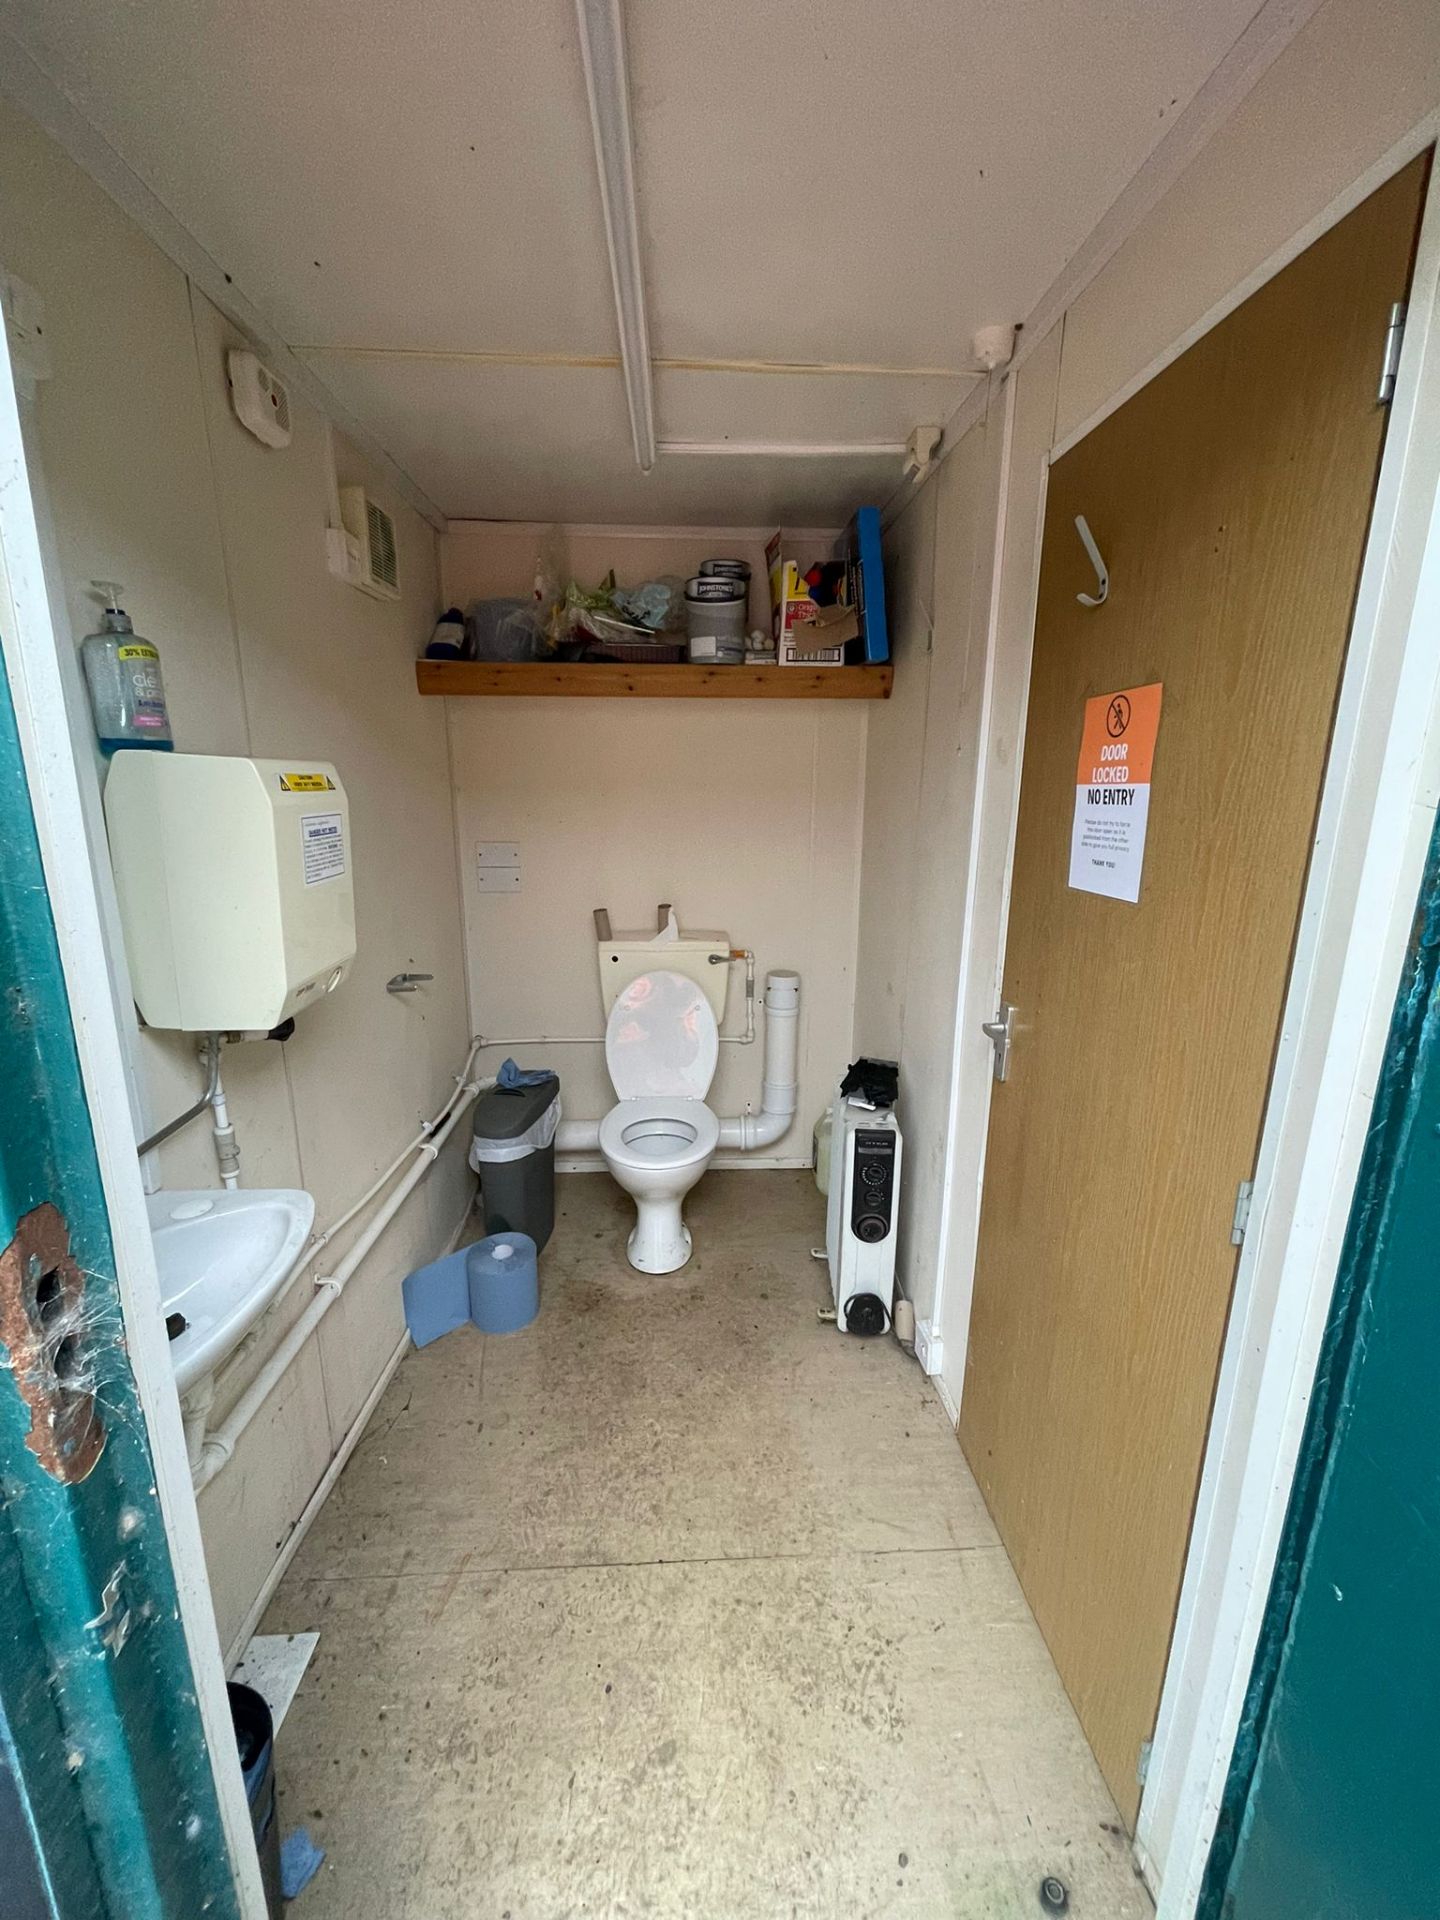 16X10FT TOILET BLOCK - 1X DISABLED/WOMEN’S TOILET - 3X MALES TOILET AND 3X URINALS - Image 8 of 8